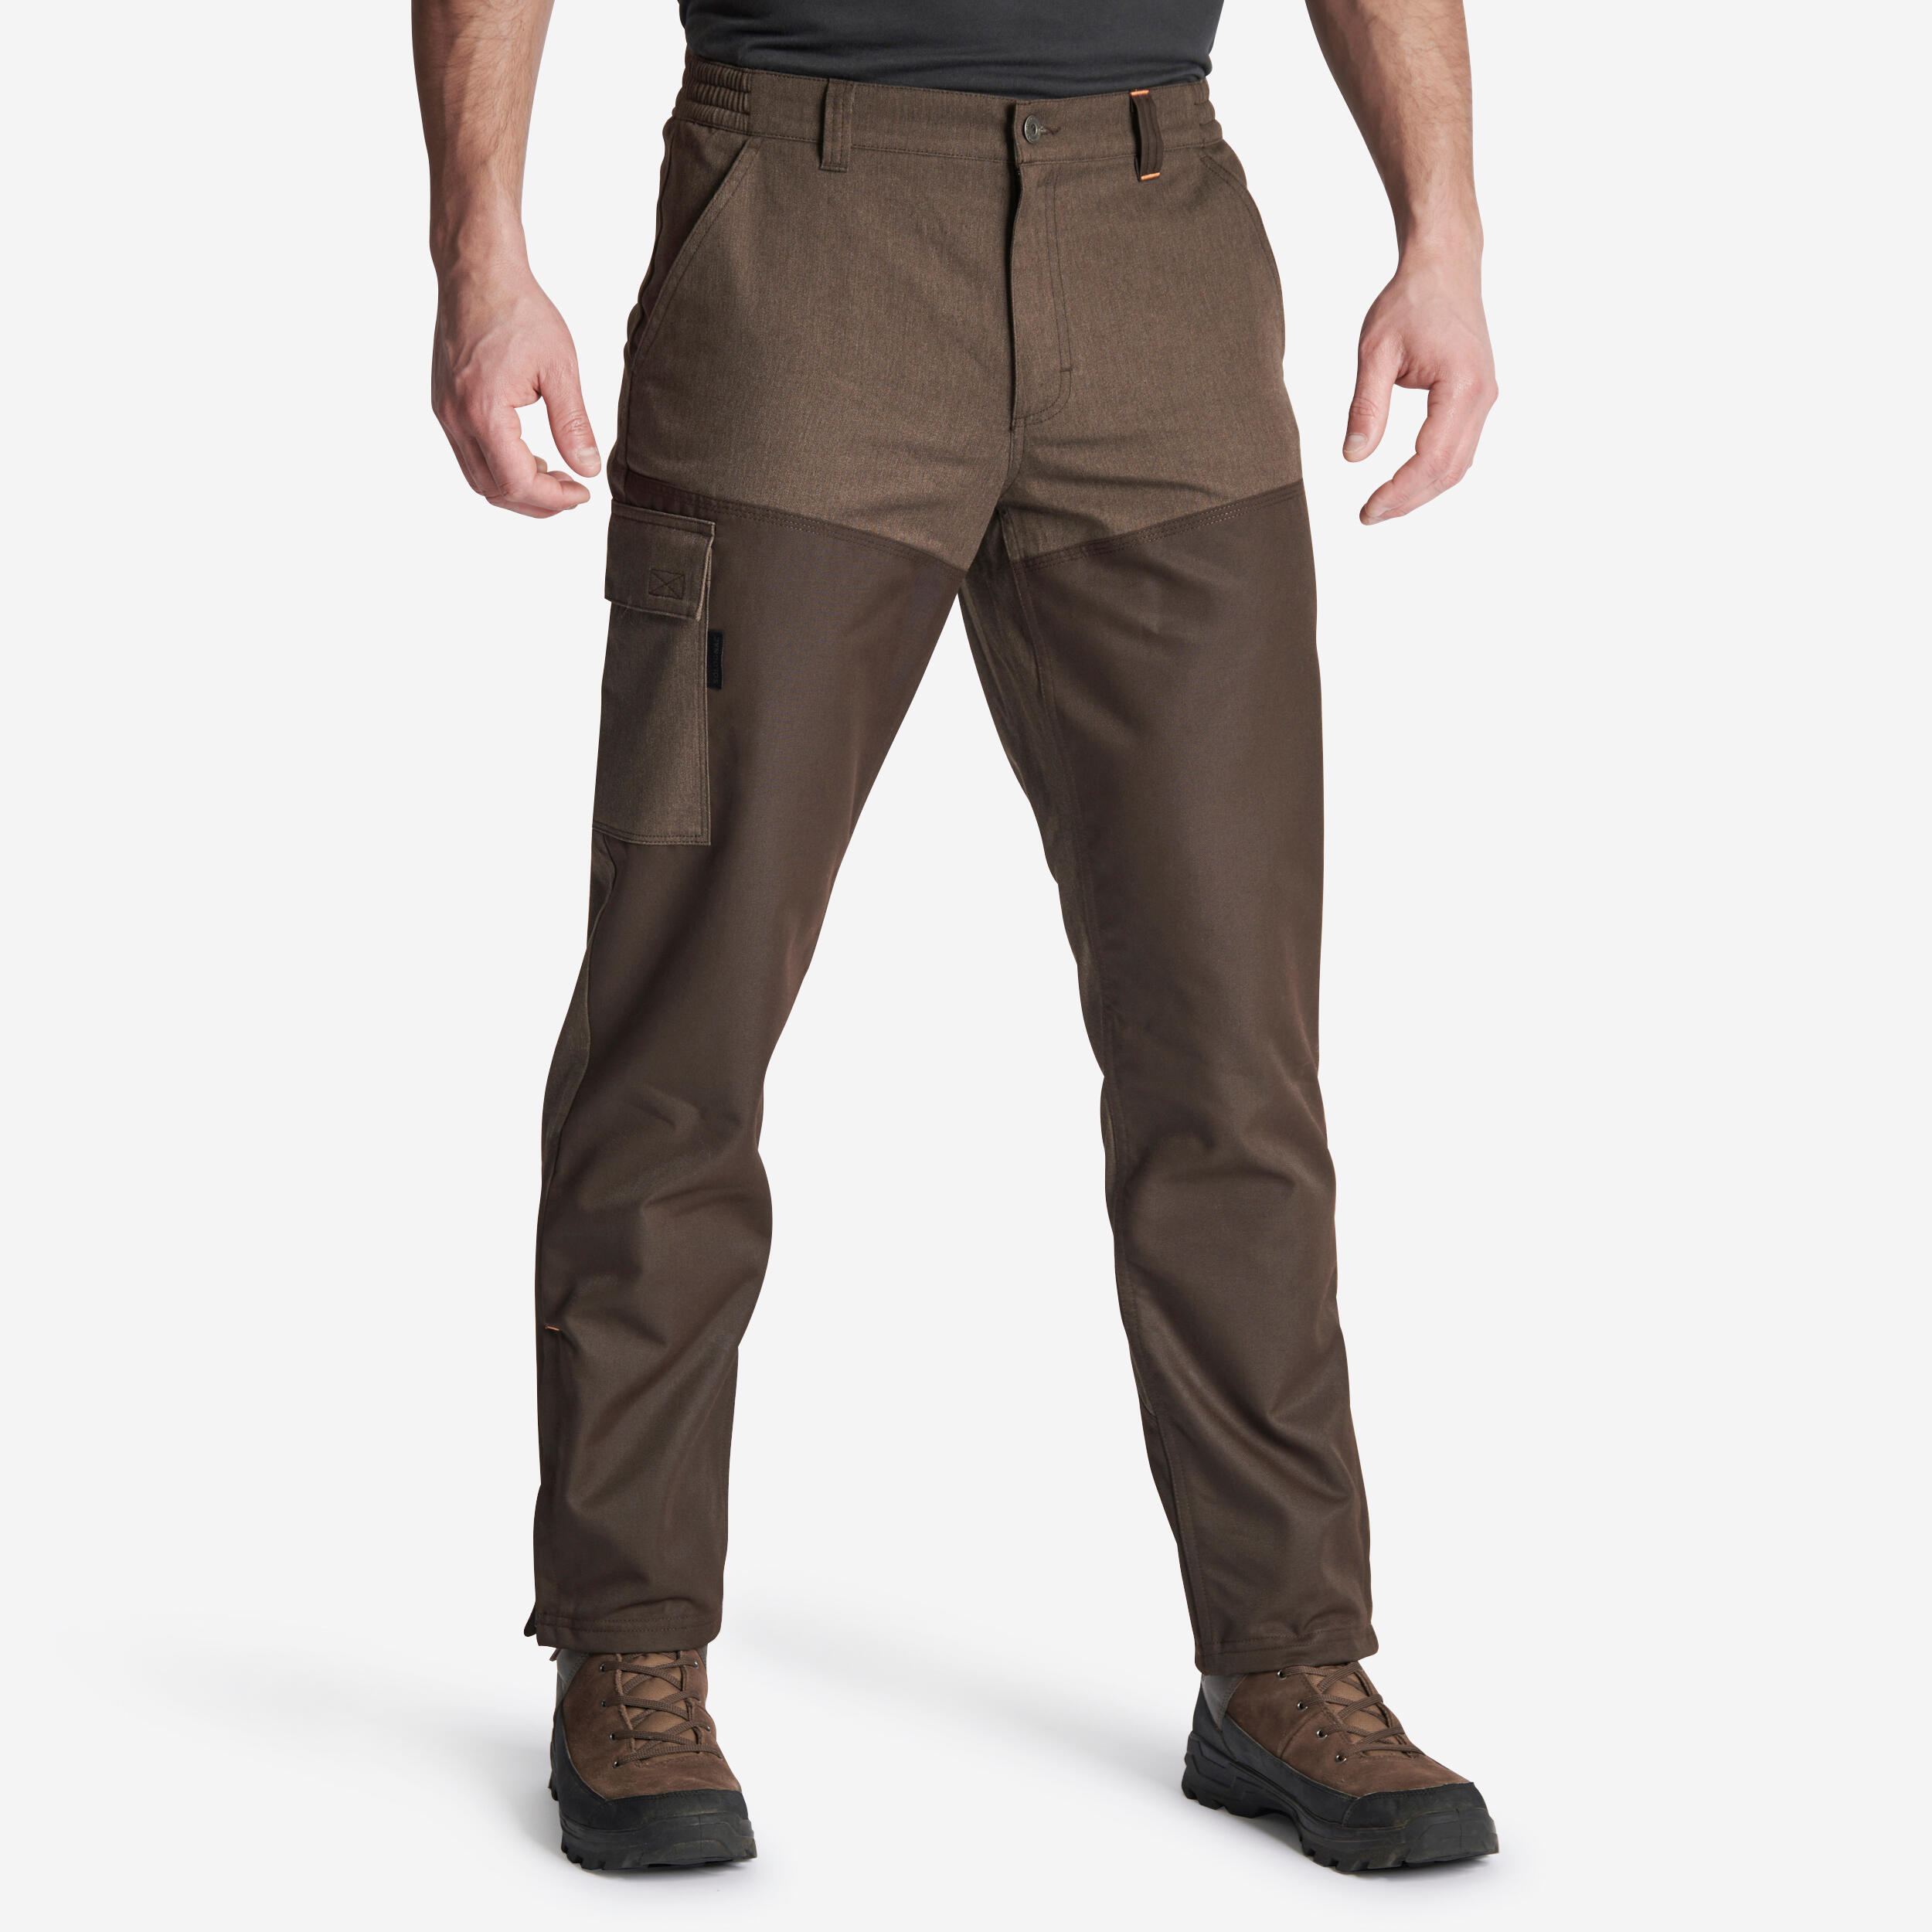 Men's Country Sport Lightweight Breathable Trousers - 500 Green SOLOGNAC |  Decathlon